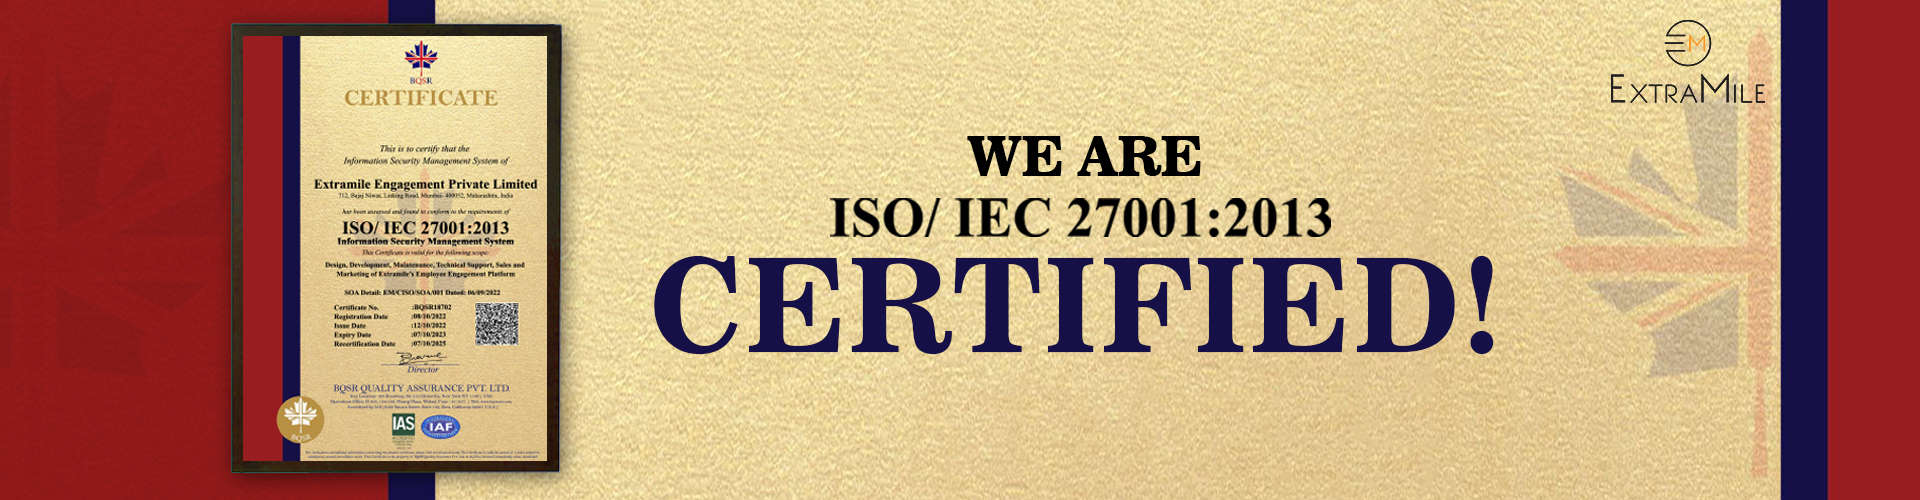 ExtraMile is Now ISO Certified!